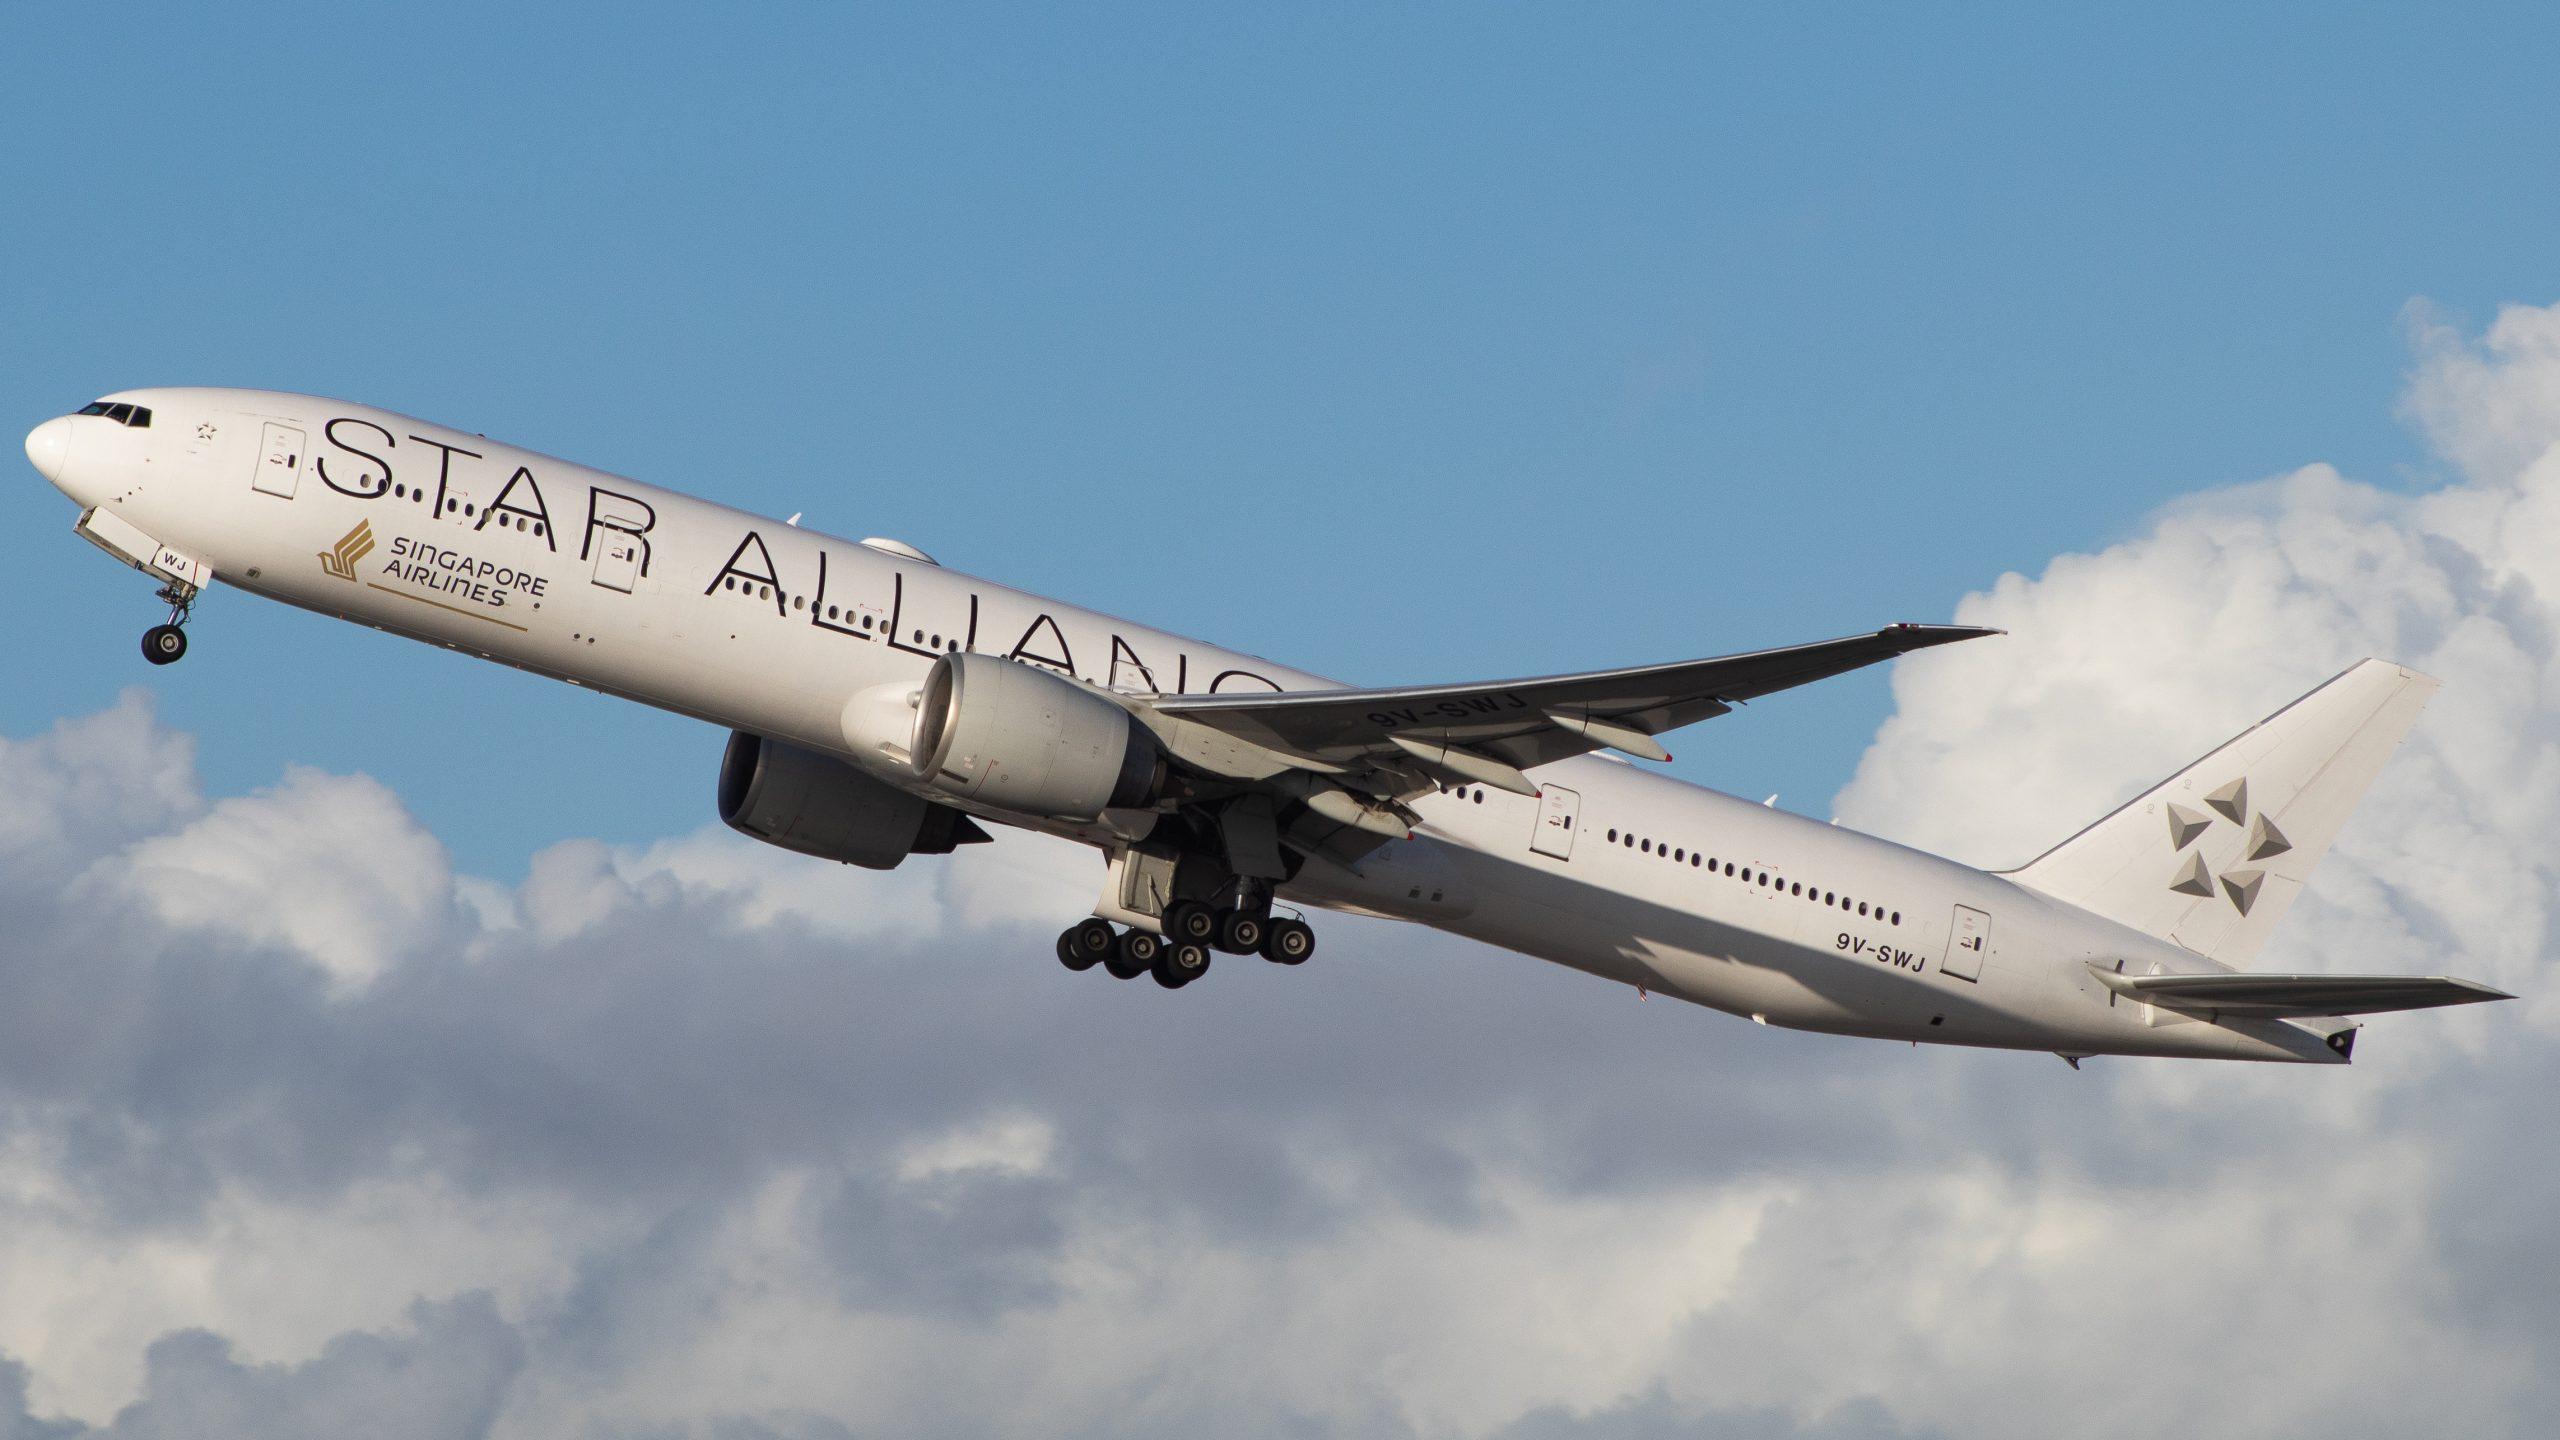 Star Alliance to Establish Center of Excellence in Singapore